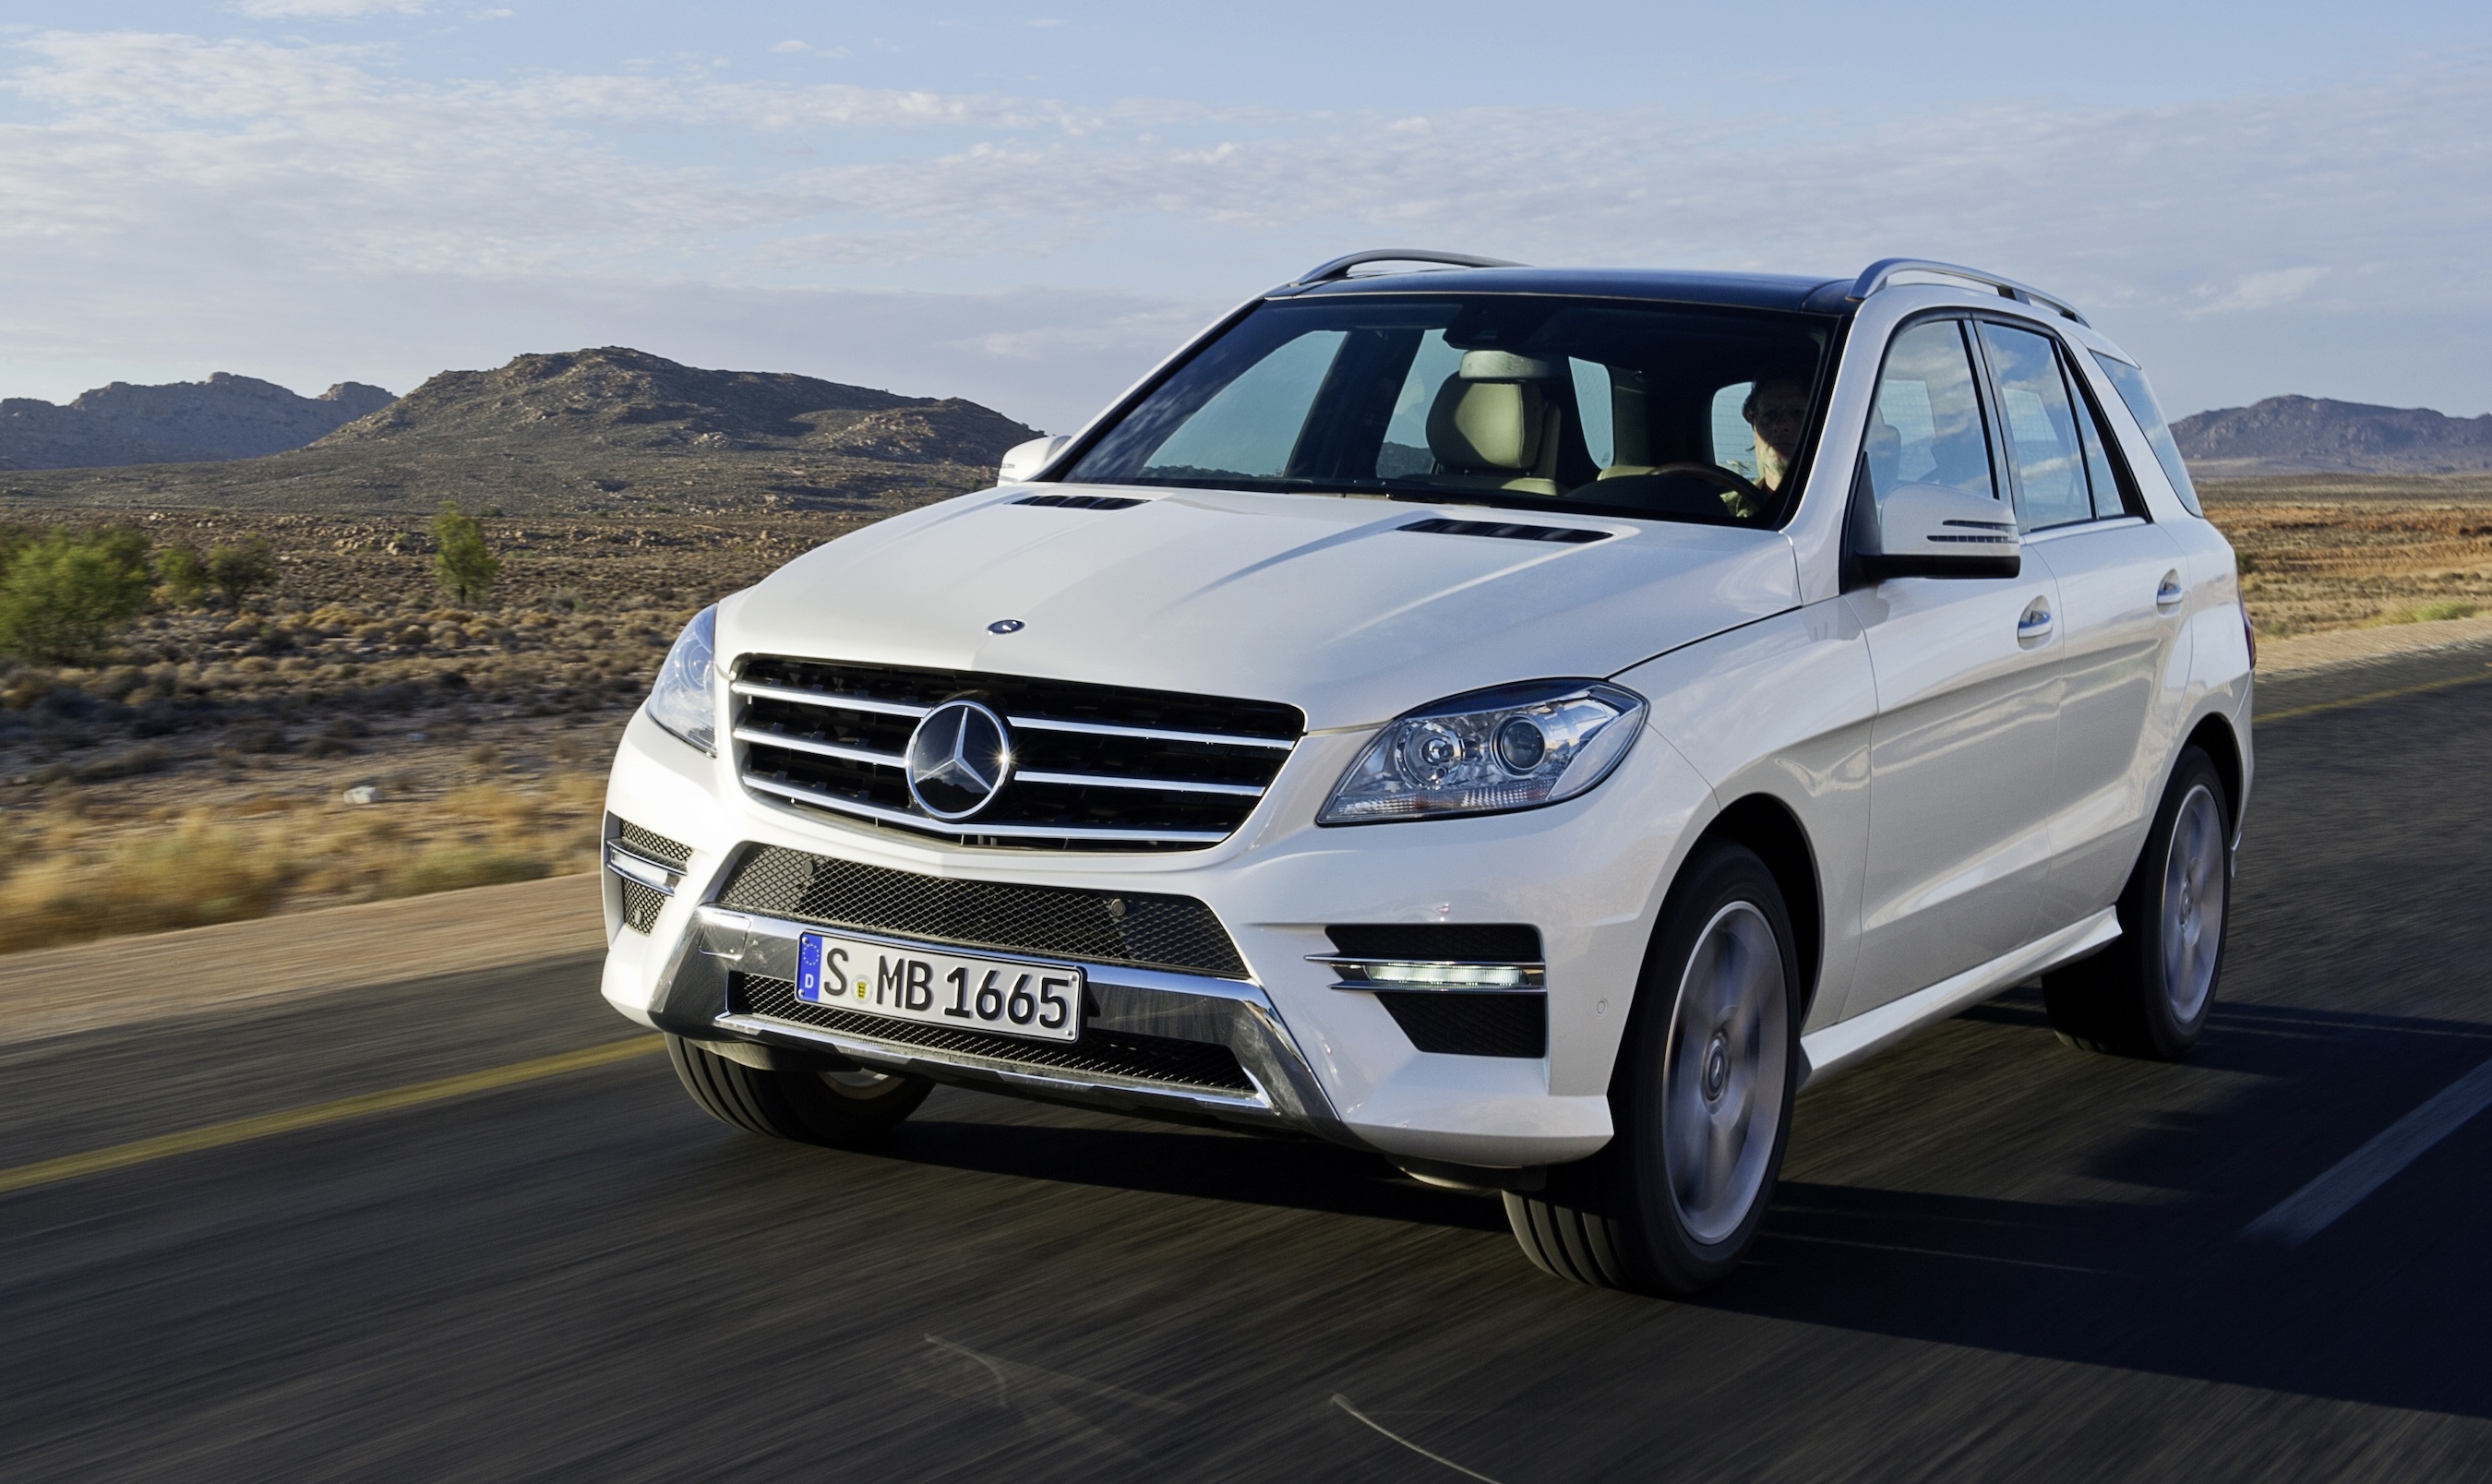 2012 MercedesBenz ML throws down gauntlet to Audi Q7 and